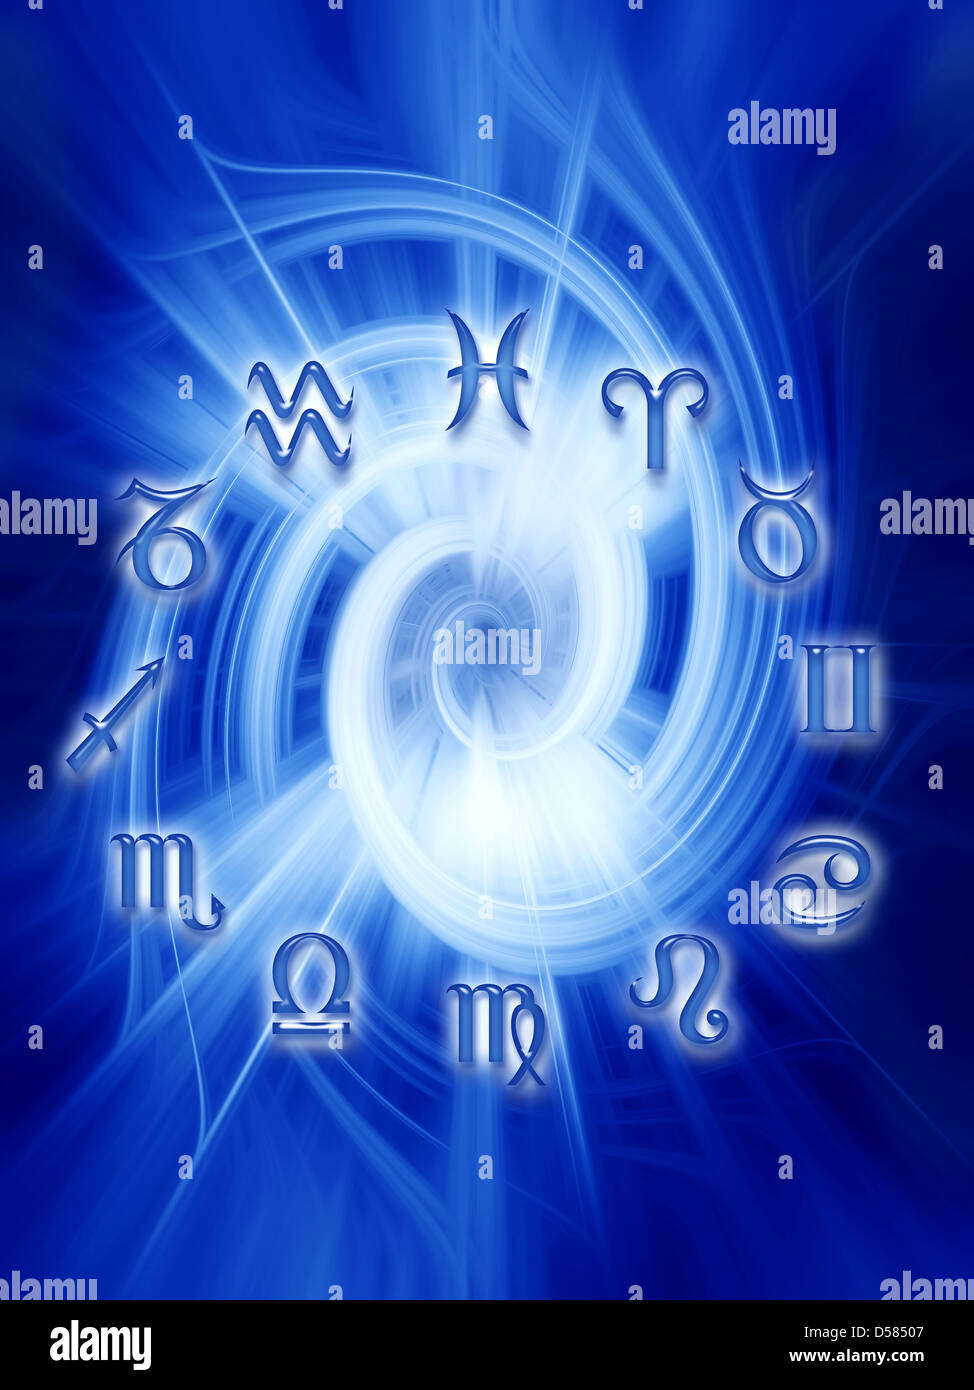 astrology and zodiac Stock Photo